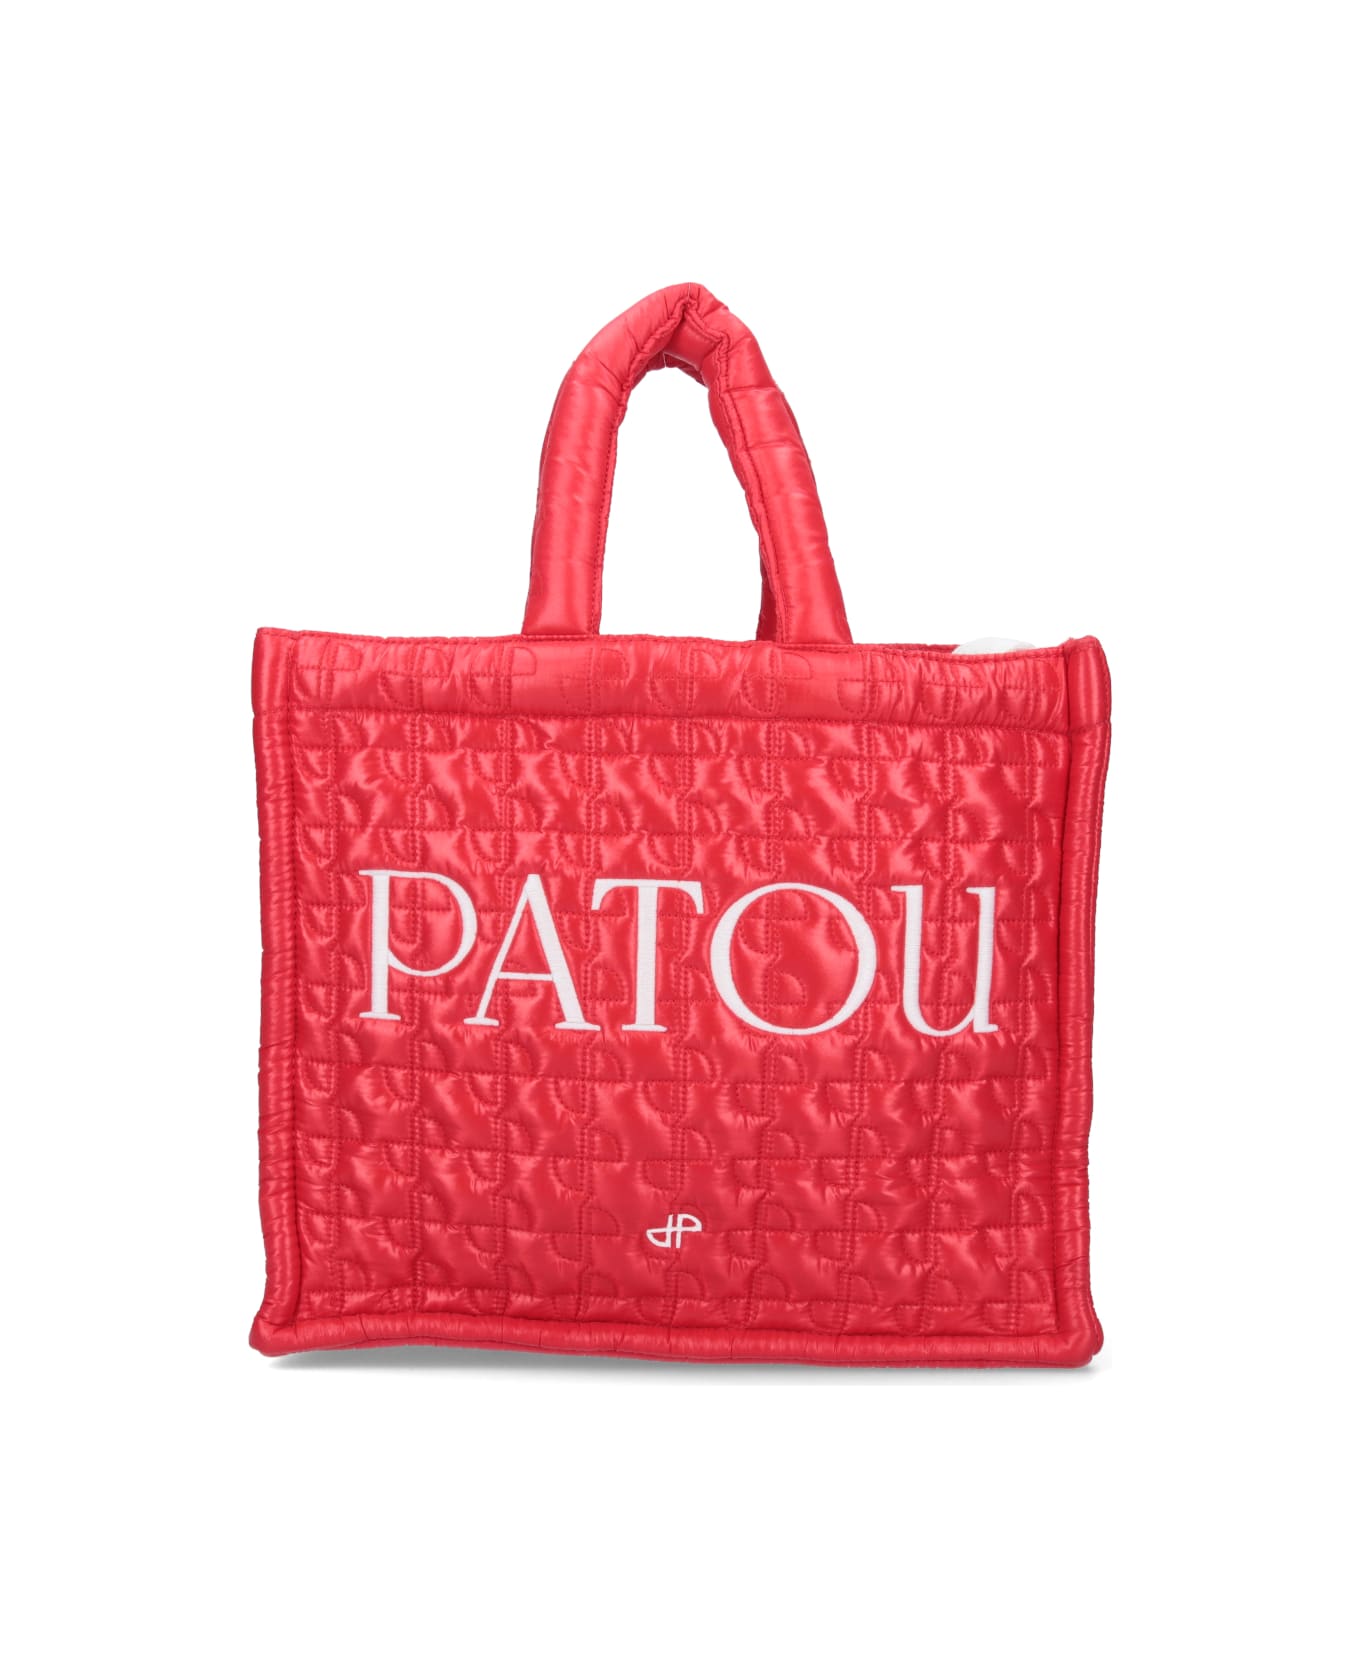 Patou Small Quilted Tote Bag - Rosso